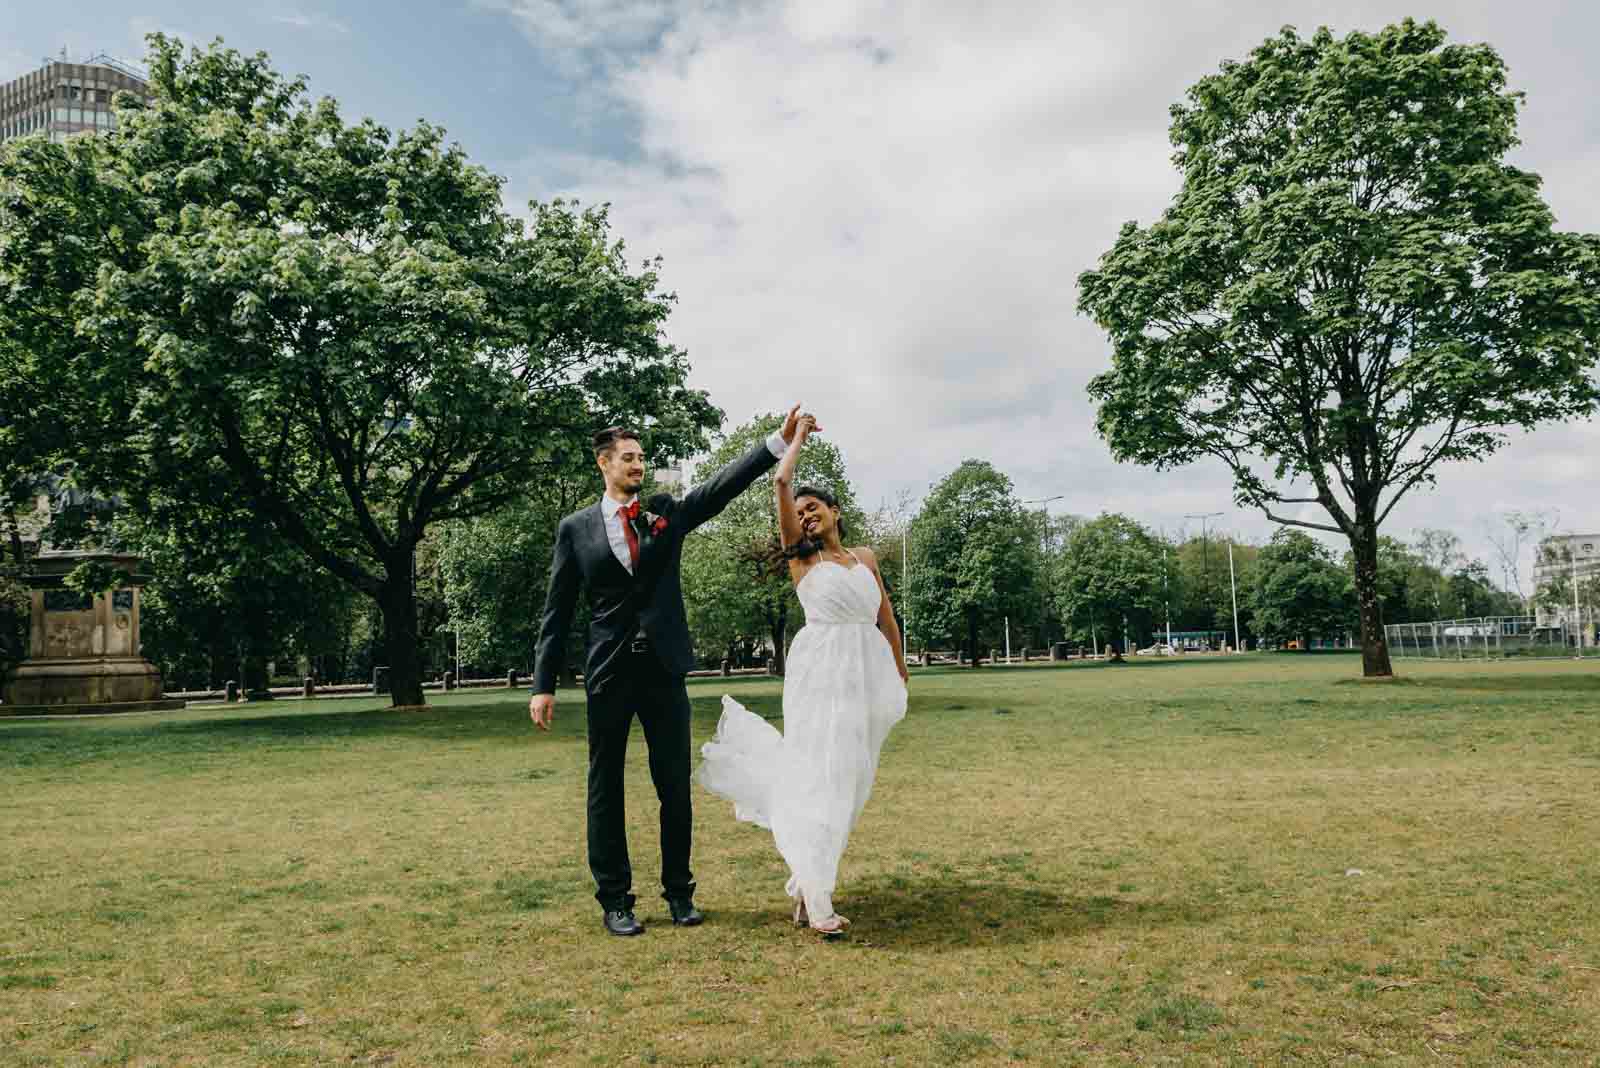 Micro wedding photography Wales - bride and groom dancing in the park